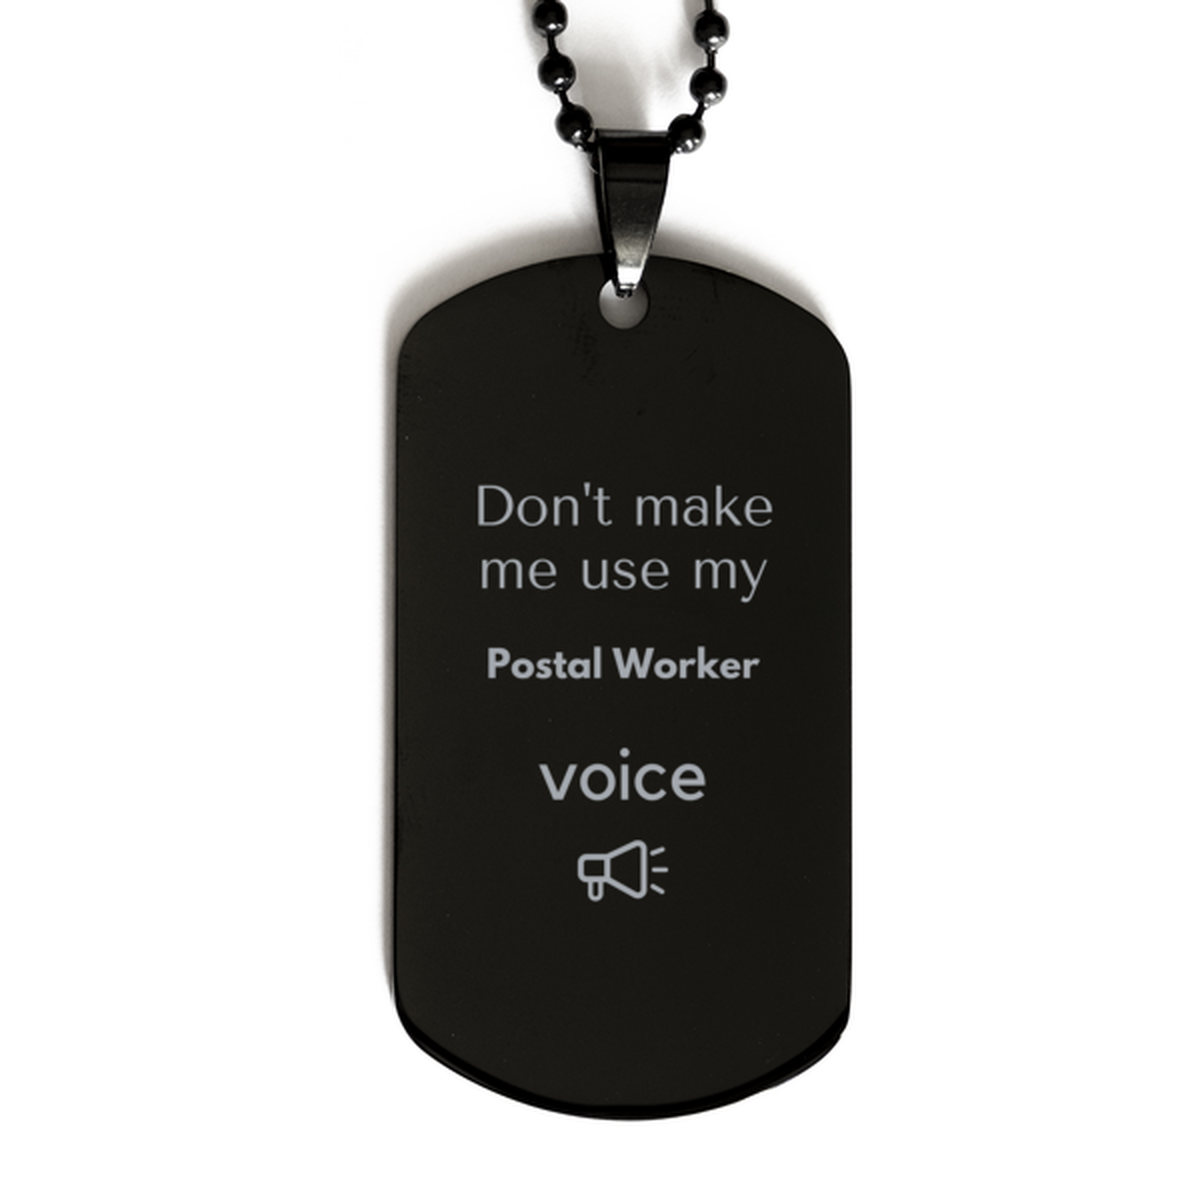 Don't make me use my Postal Worker voice, Sarcasm Postal Worker Gifts, Christmas Postal Worker Black Dog Tag Birthday Unique Gifts For Postal Worker Coworkers, Men, Women, Colleague, Friends